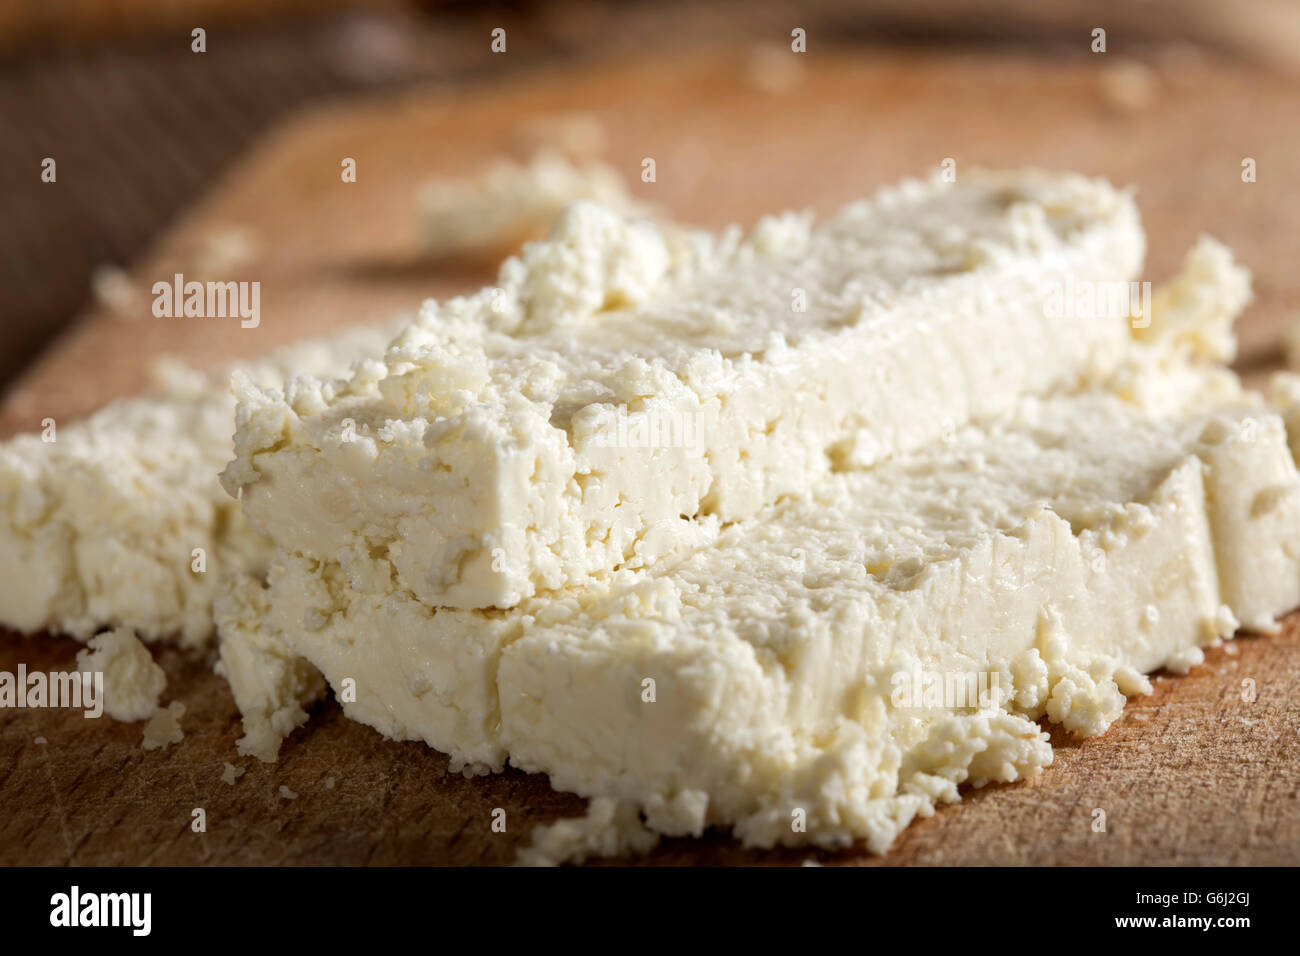 Fresh cheese slices on a wooden background Stock Photo